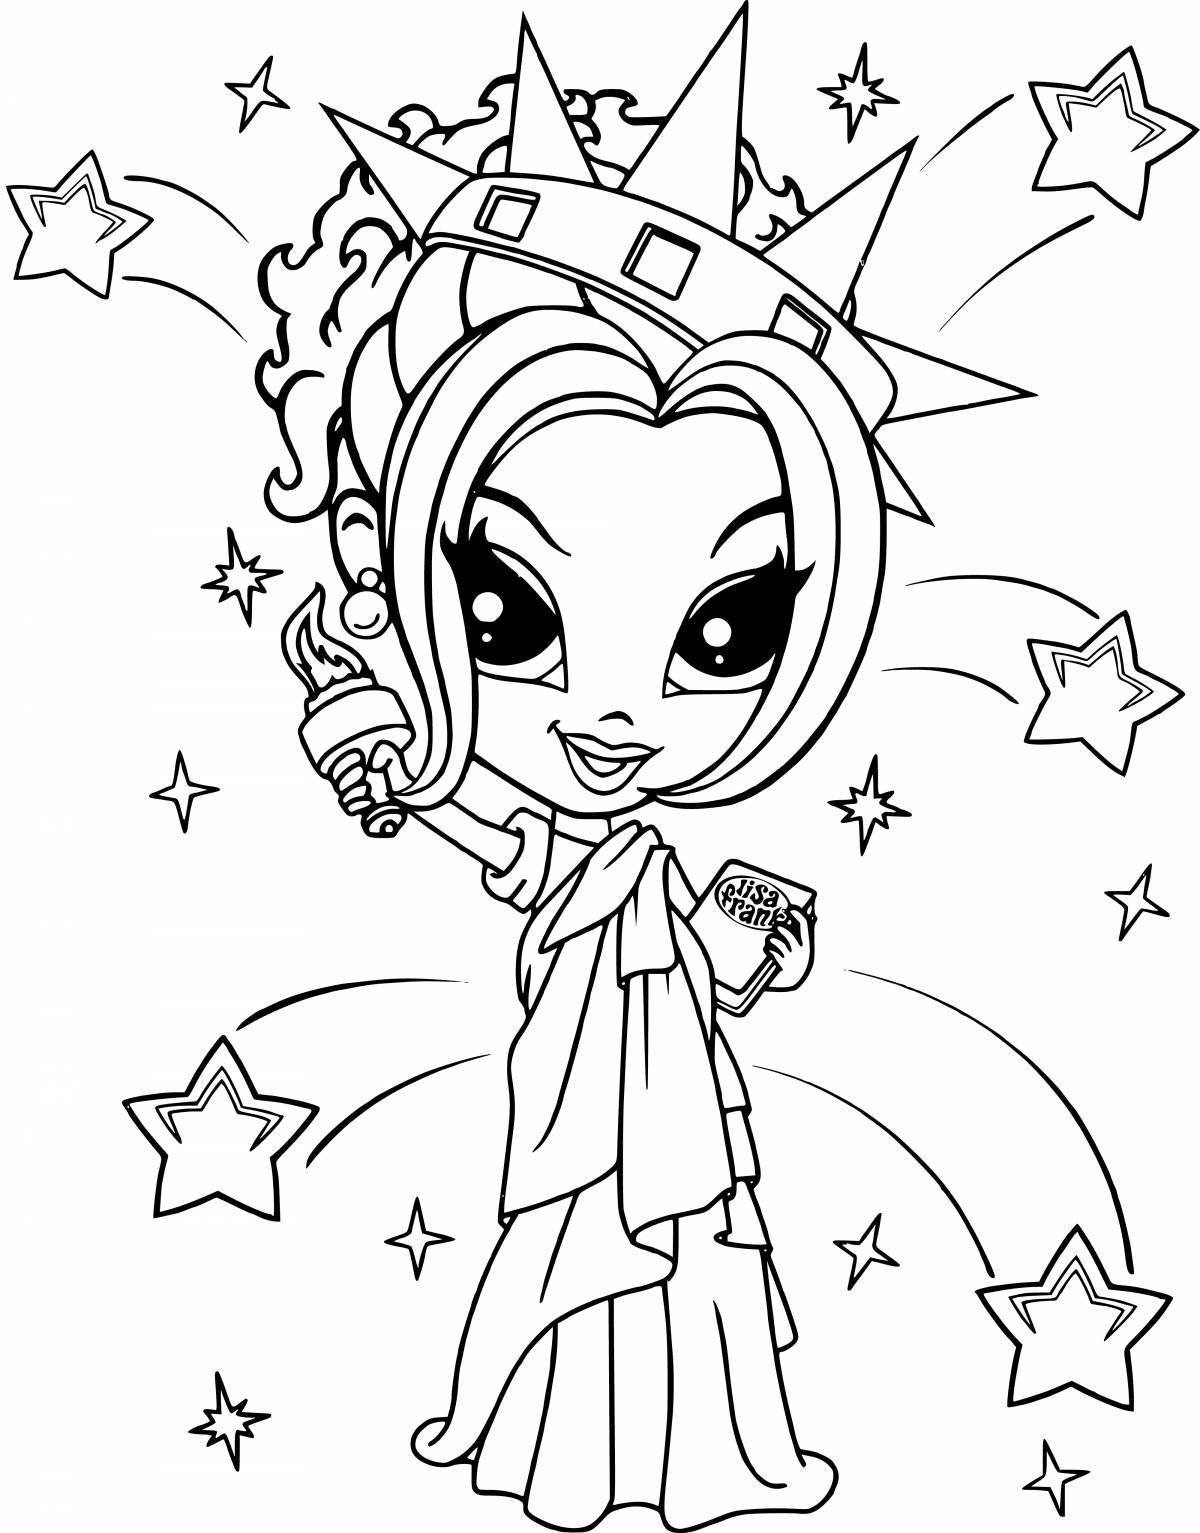 Shining coloring book for girls 9-10 years old